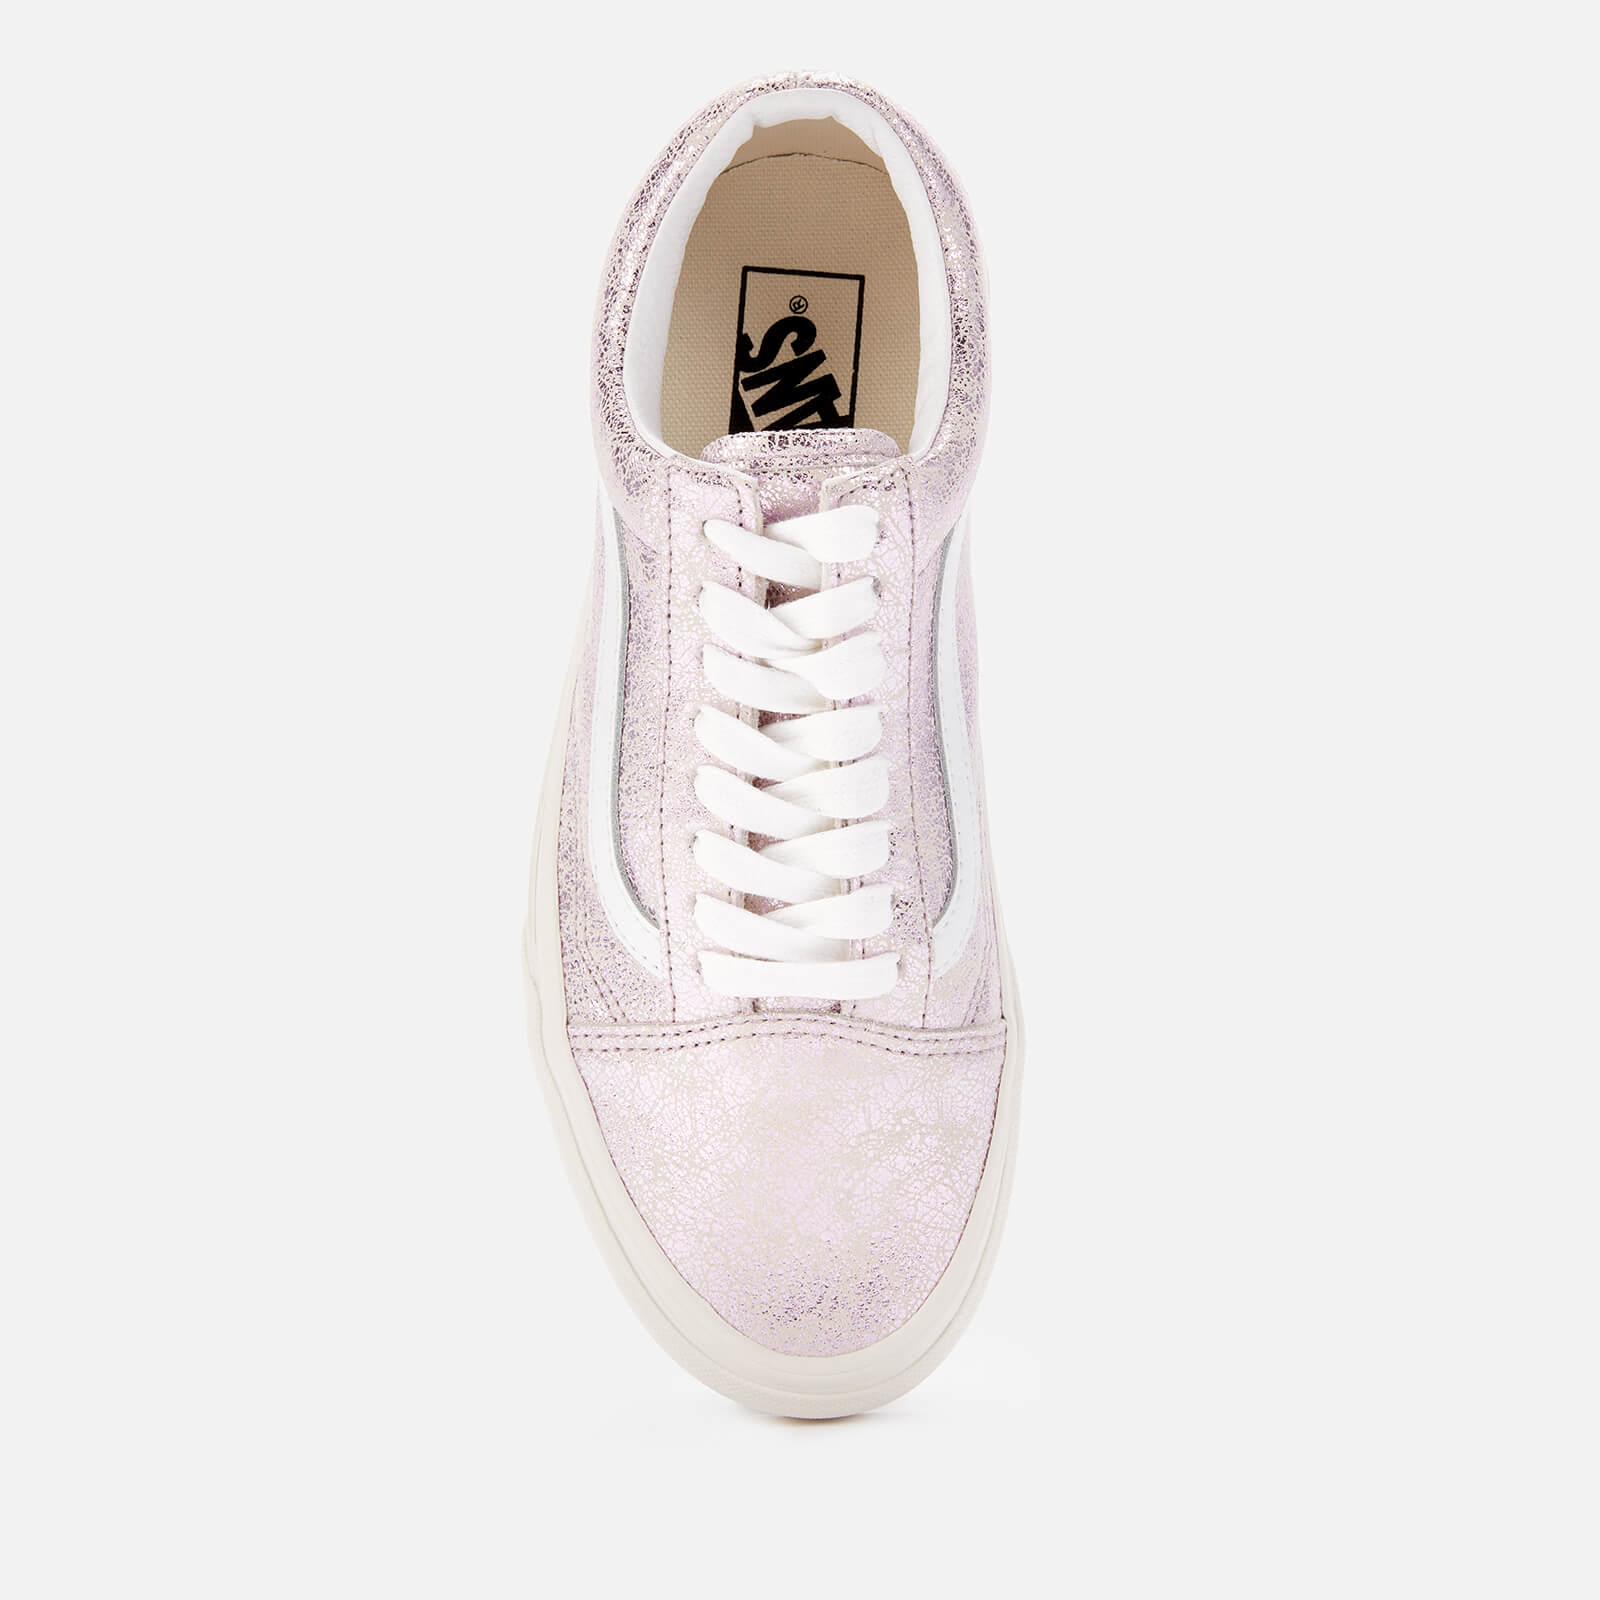 Stad bloem Mail intern Vans Cracked Leather Old Skool Trainers in Pink | Lyst